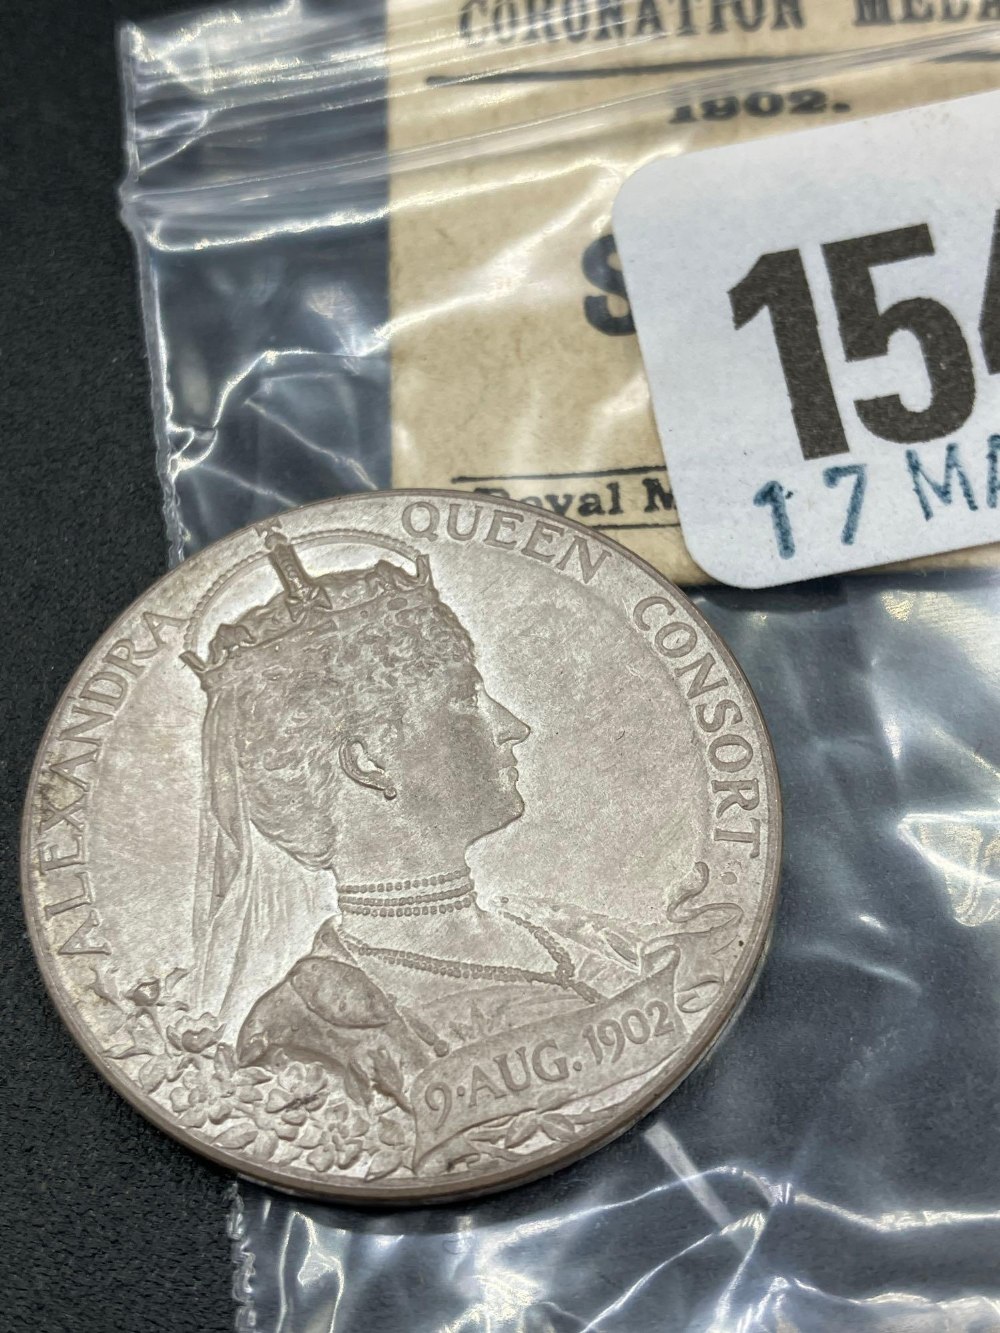 Silver Coronation Medal 1902, 12.6g - Image 2 of 2